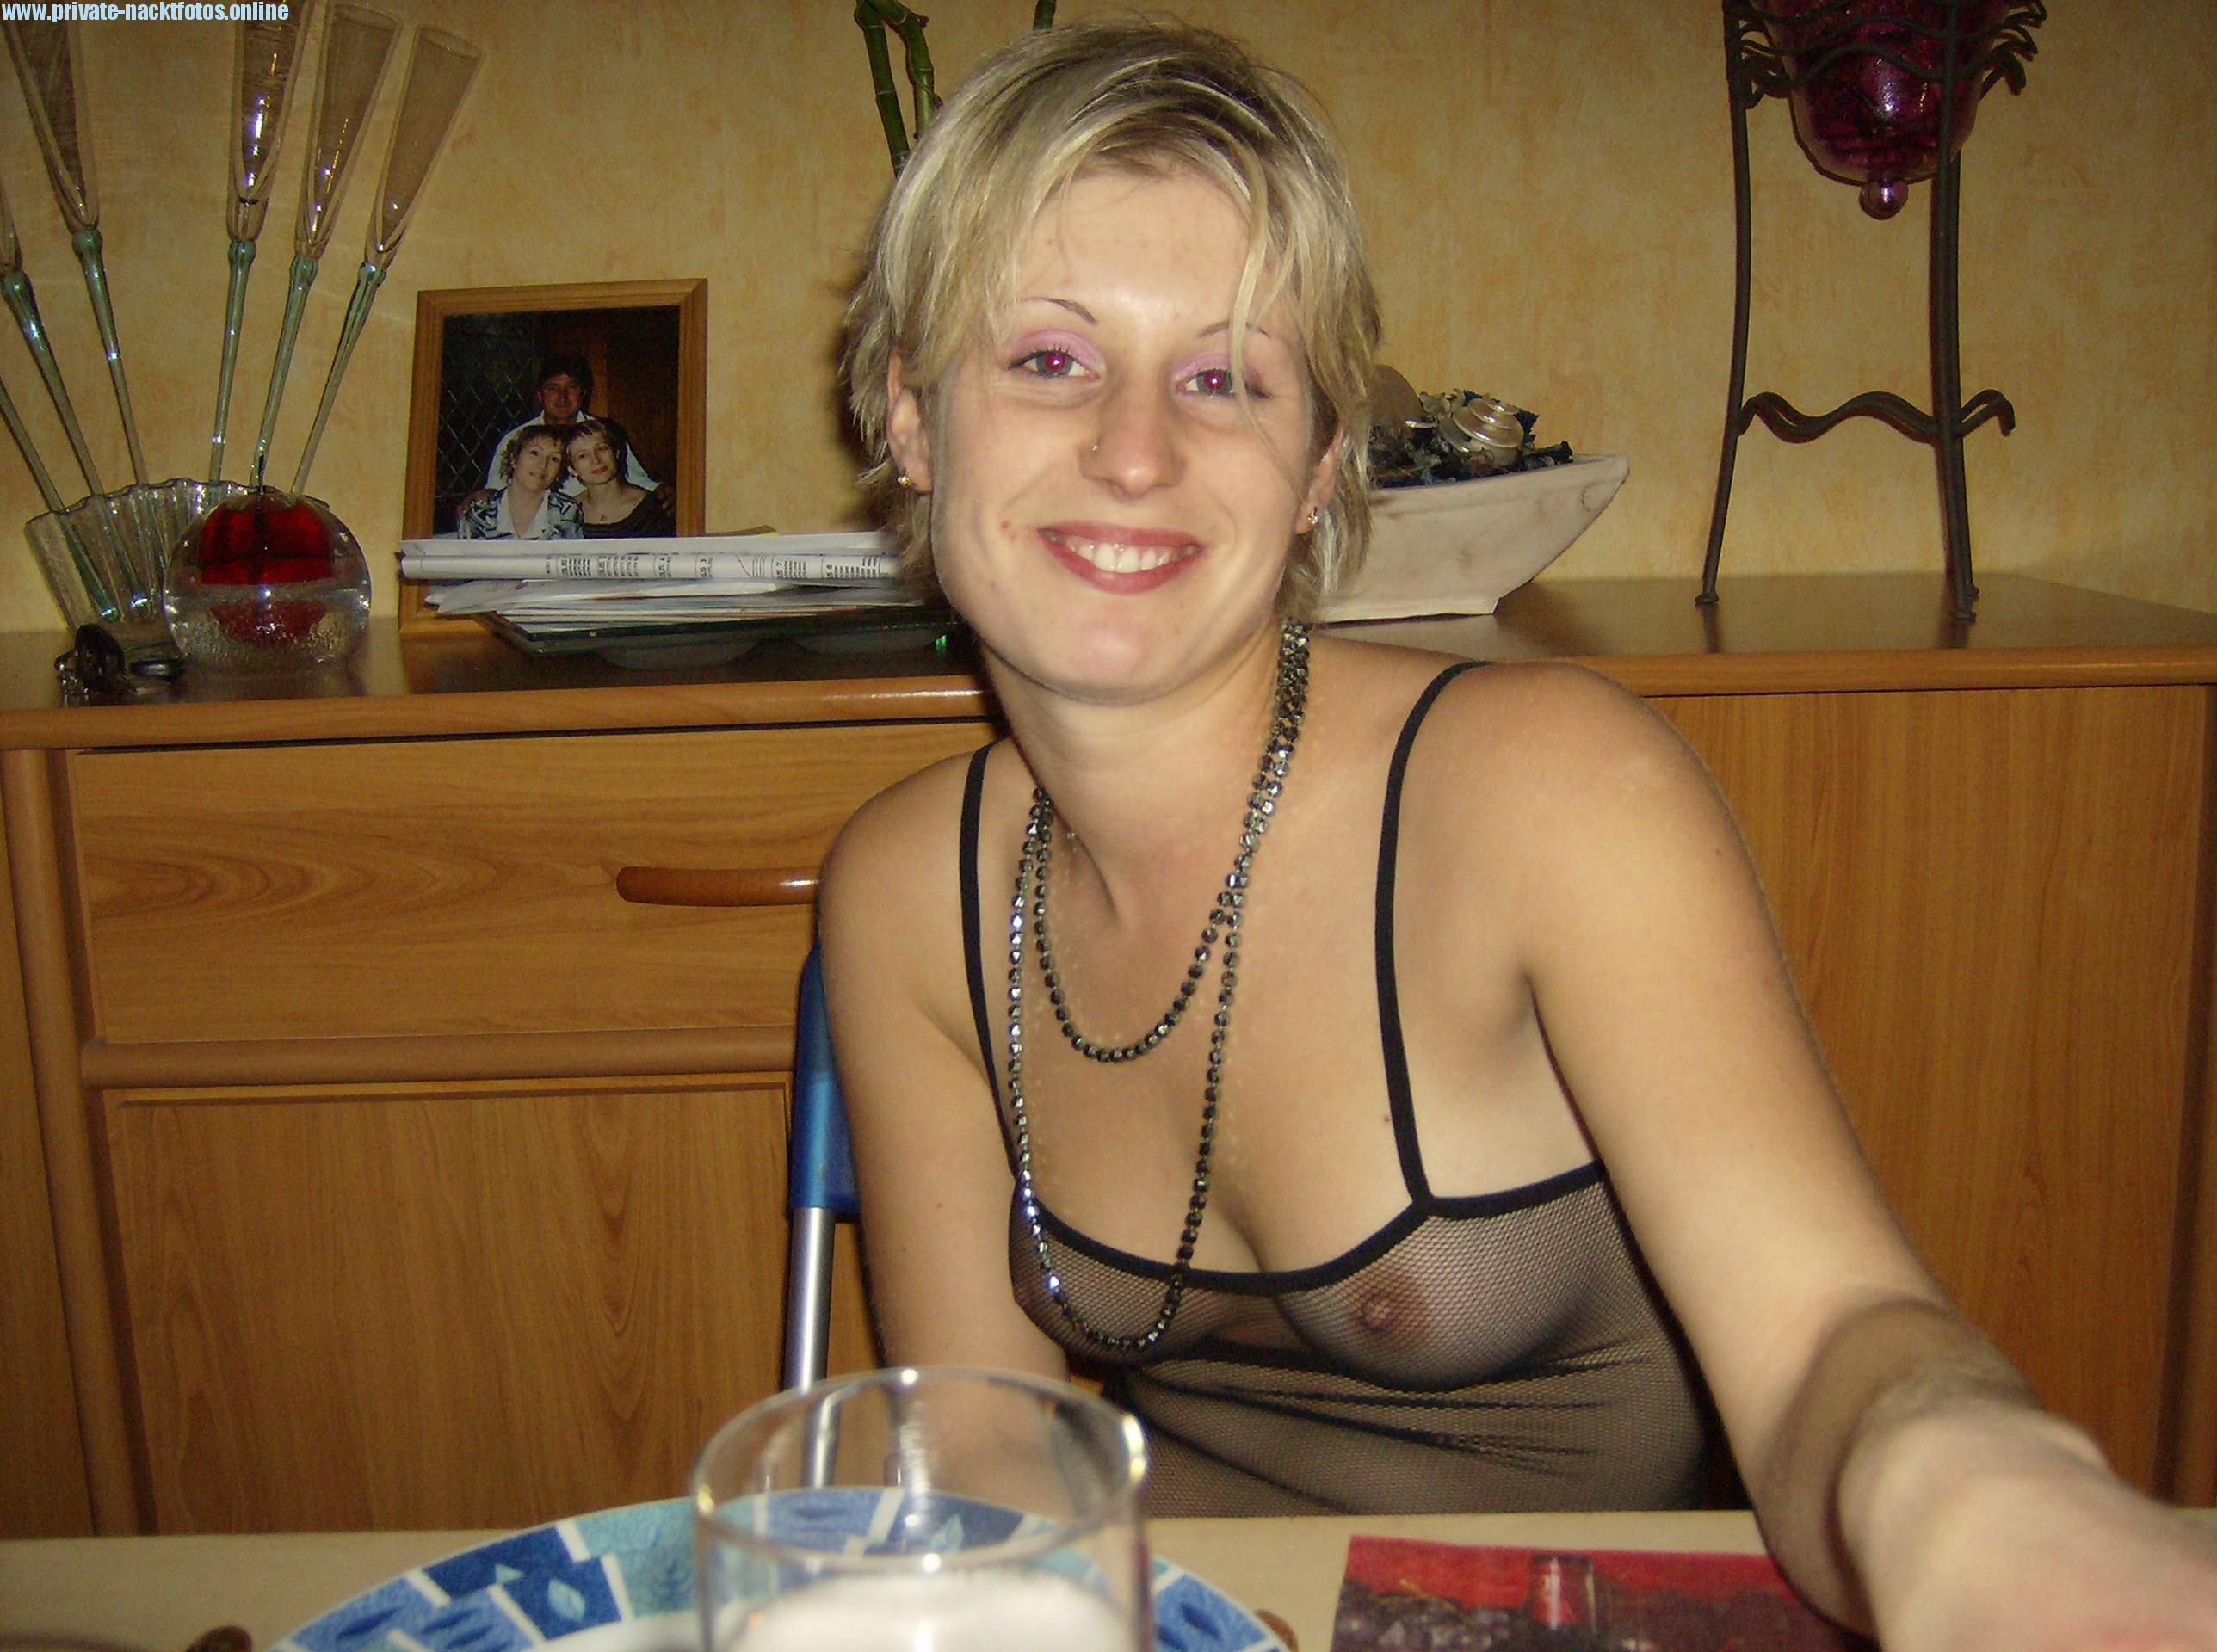 private photos of swingers online